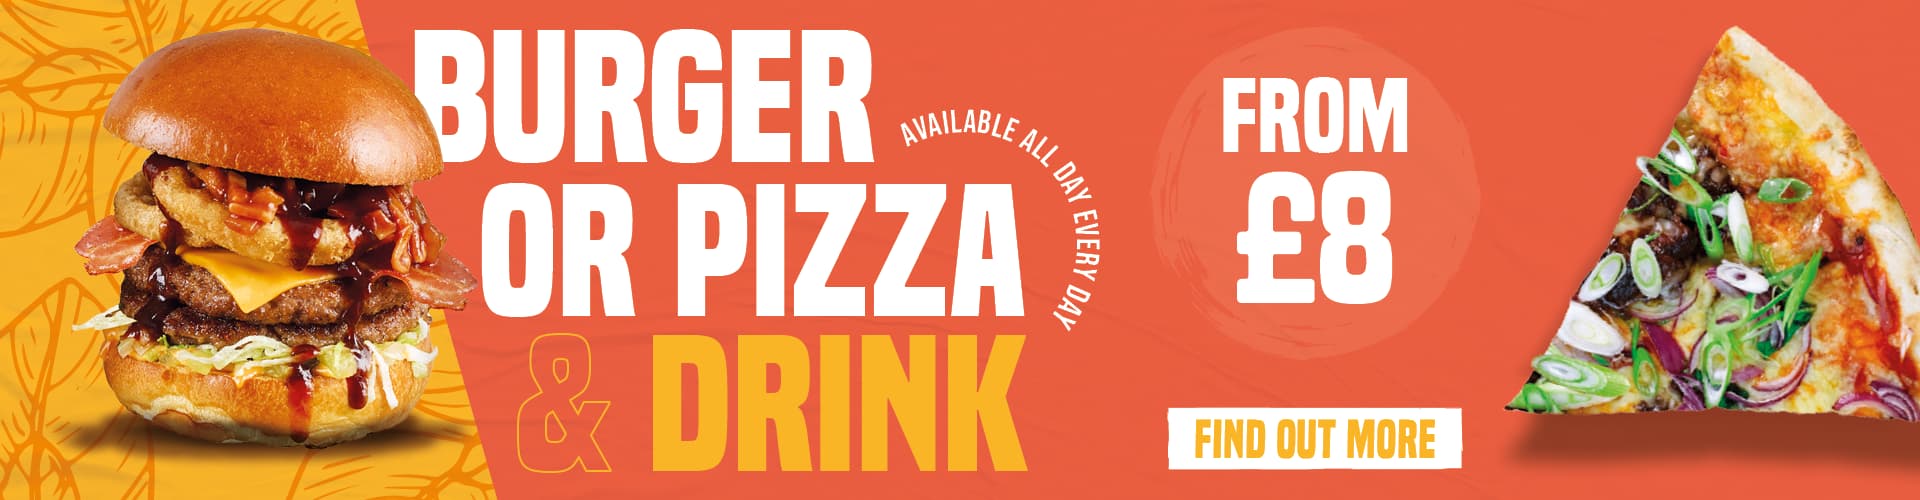 Burger or Pizza & Drink - Available All Day Every Day From £8. Find Out More!